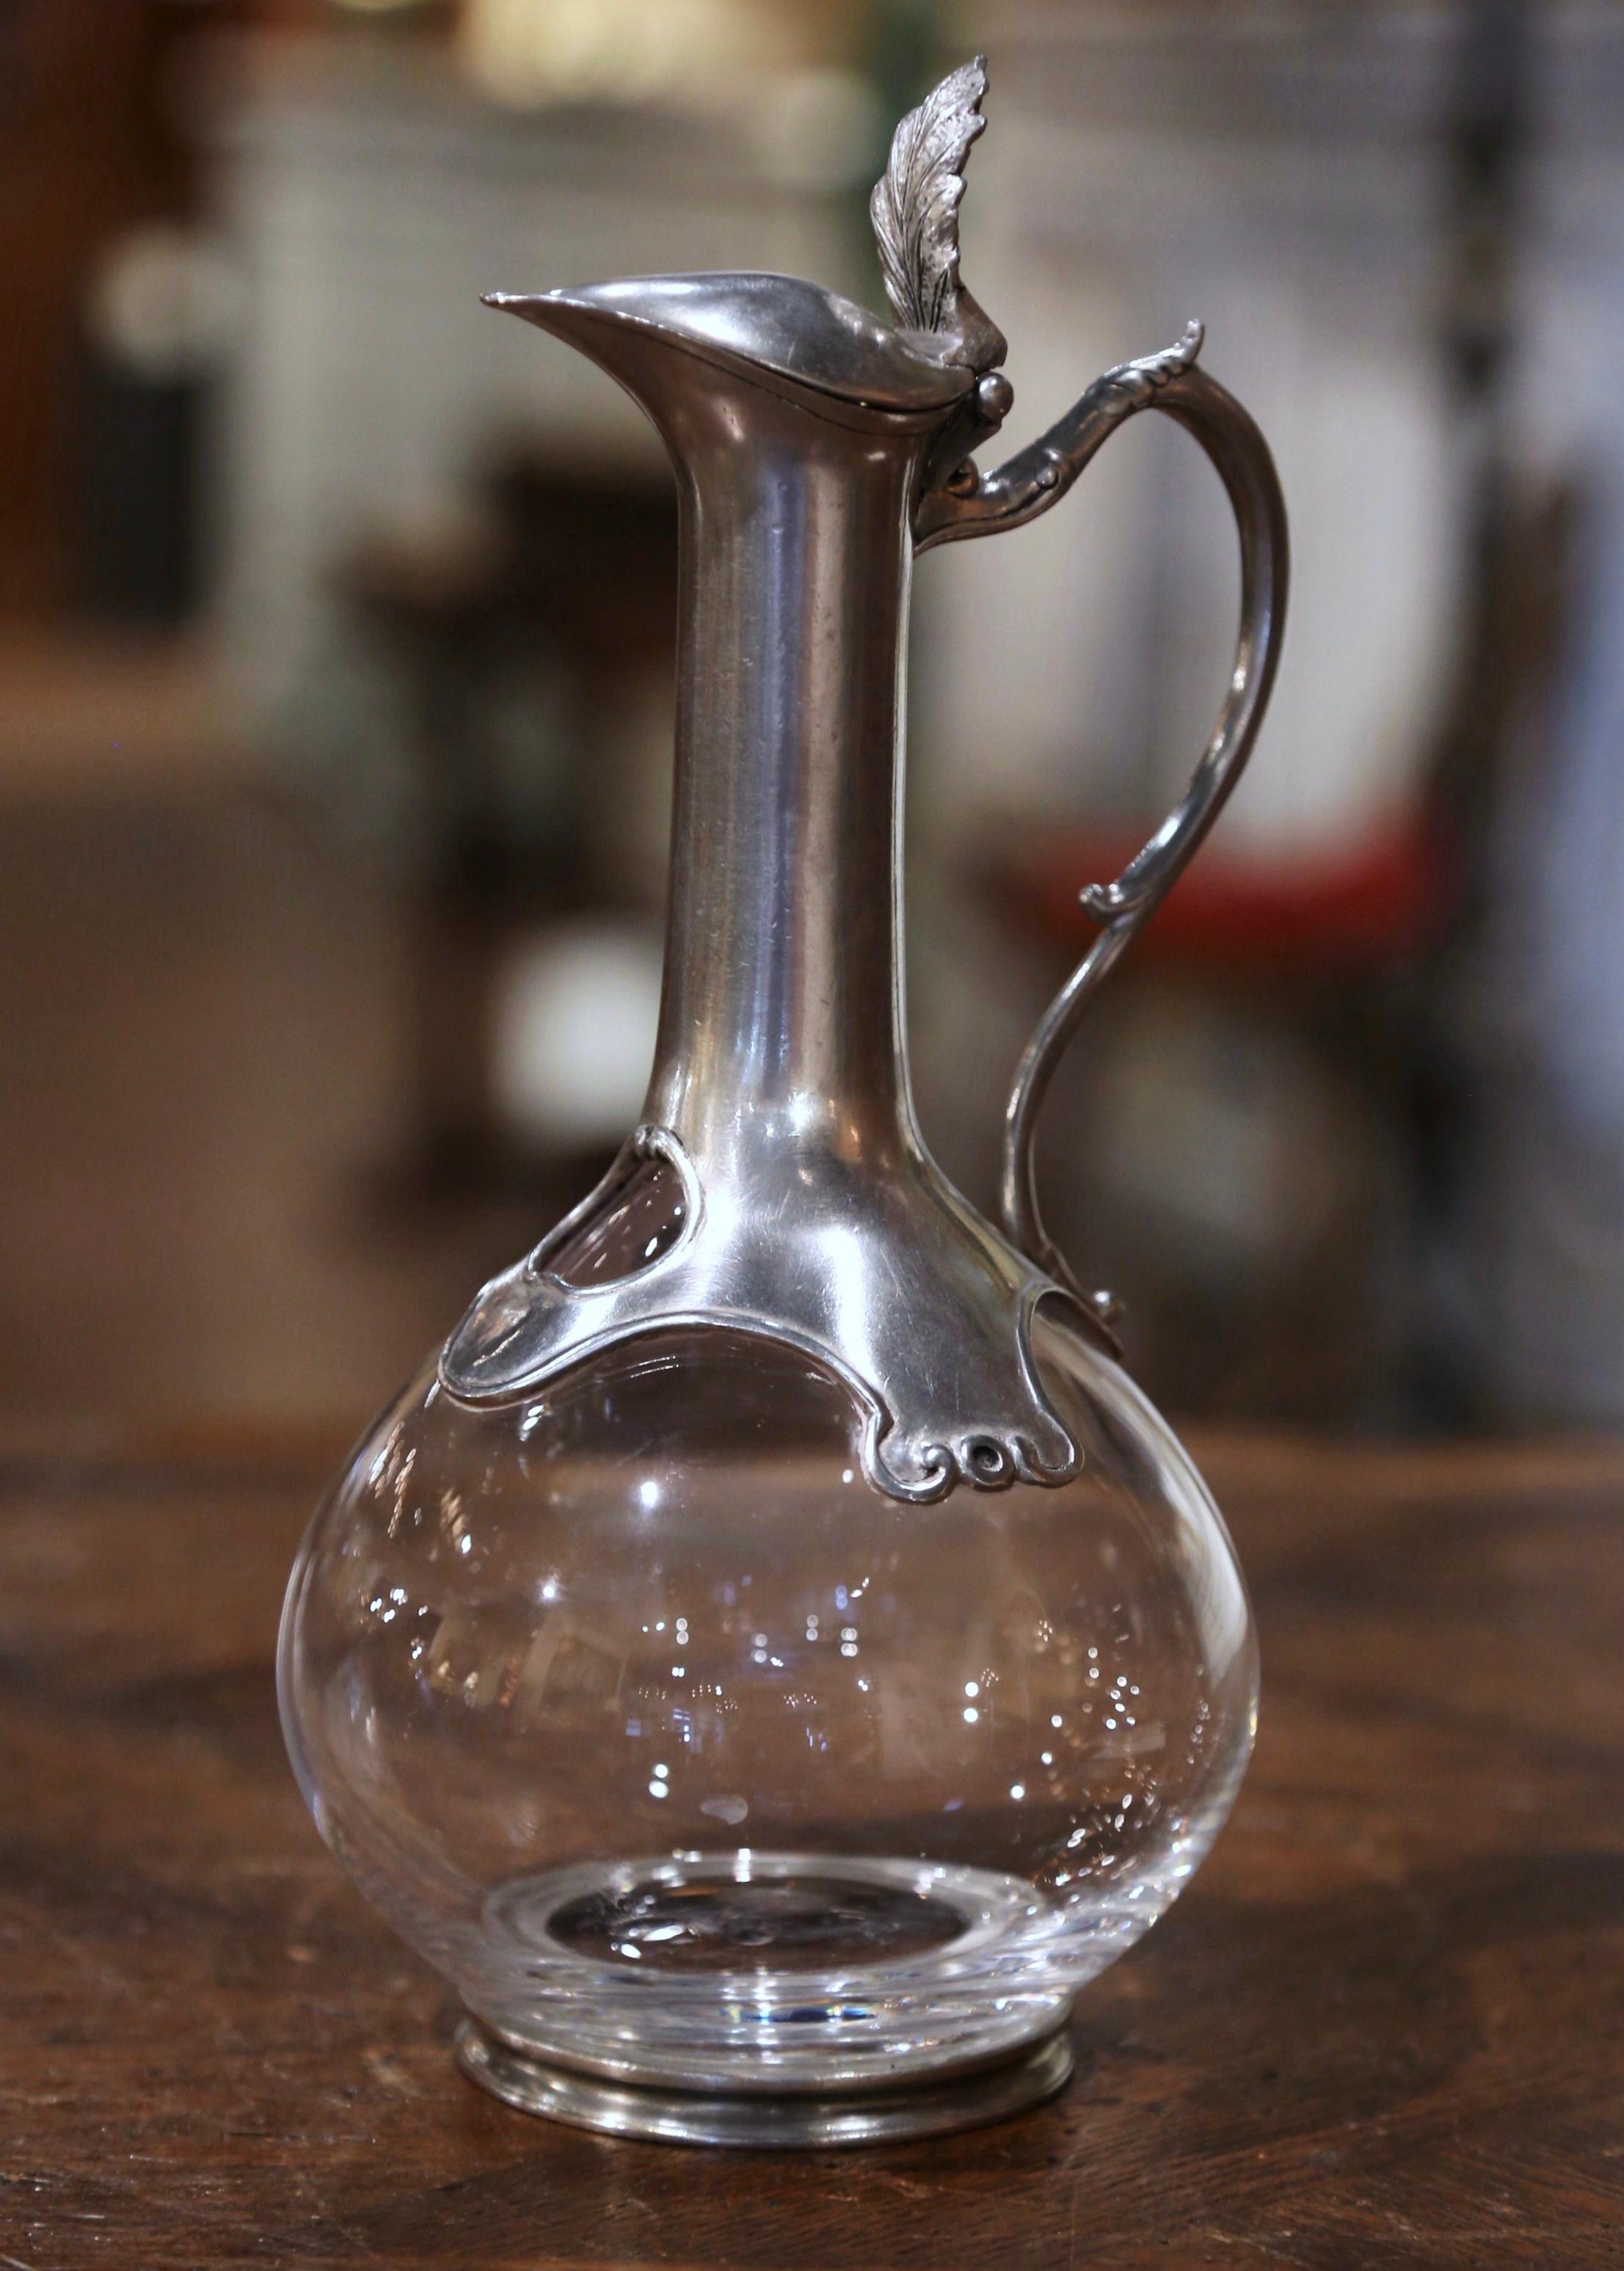 Serve your favorite Bordeaux or Cabernet Sauvignon with style in this elegant antique decanter. Crafted in France circa 1960, the cut crystal carafe stands on a round pewter base. The tall neck with side handle is dressed with pouring spout and